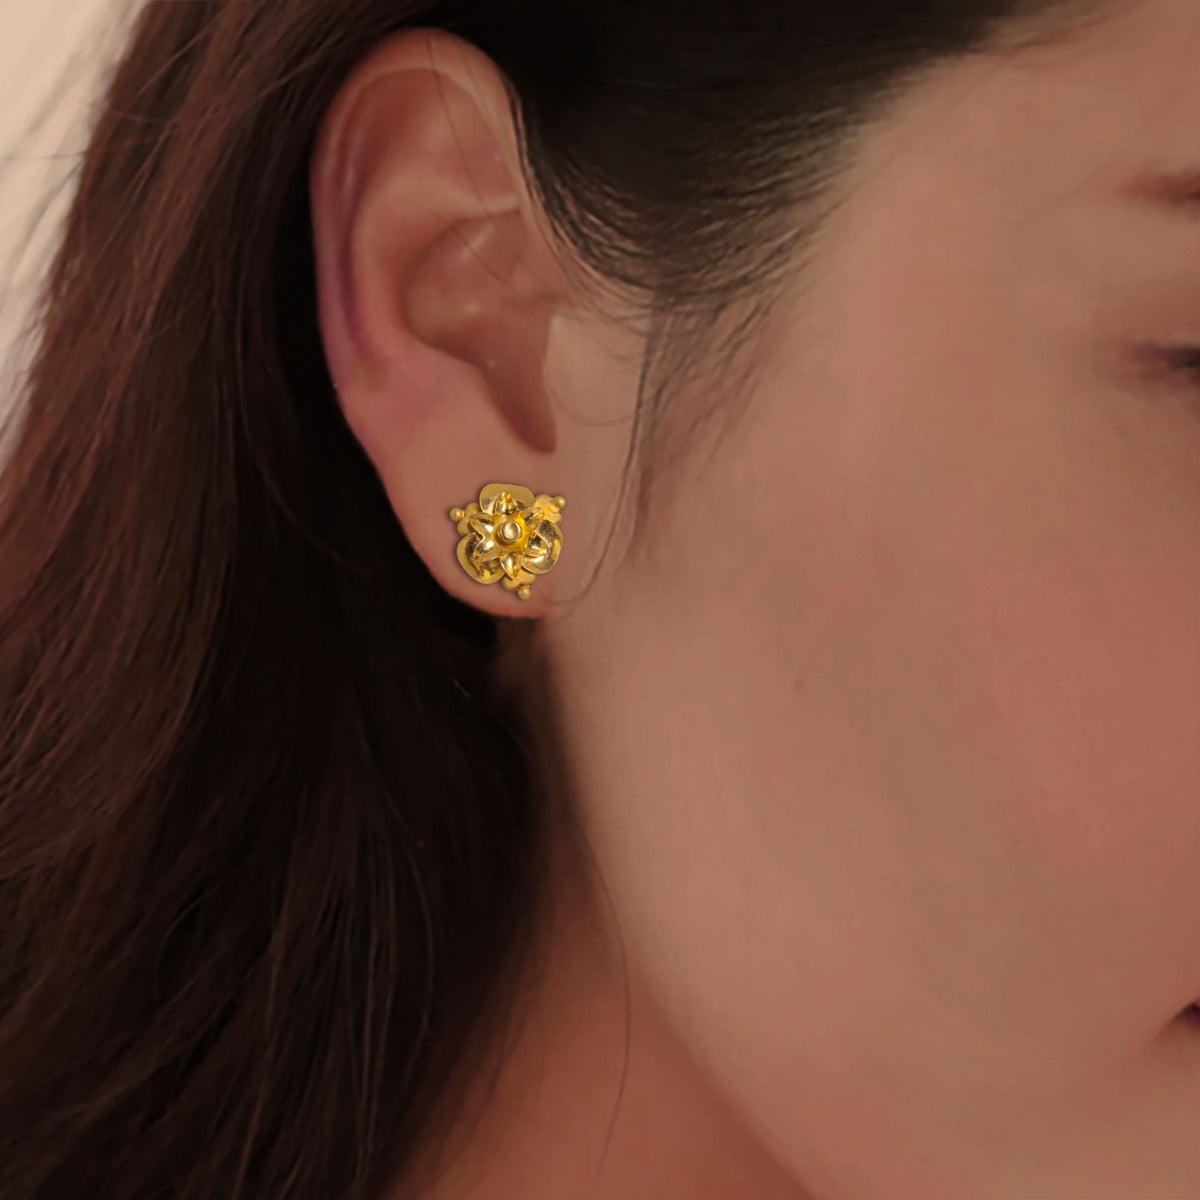 Discover more than 121 gold earrings for college girl latest